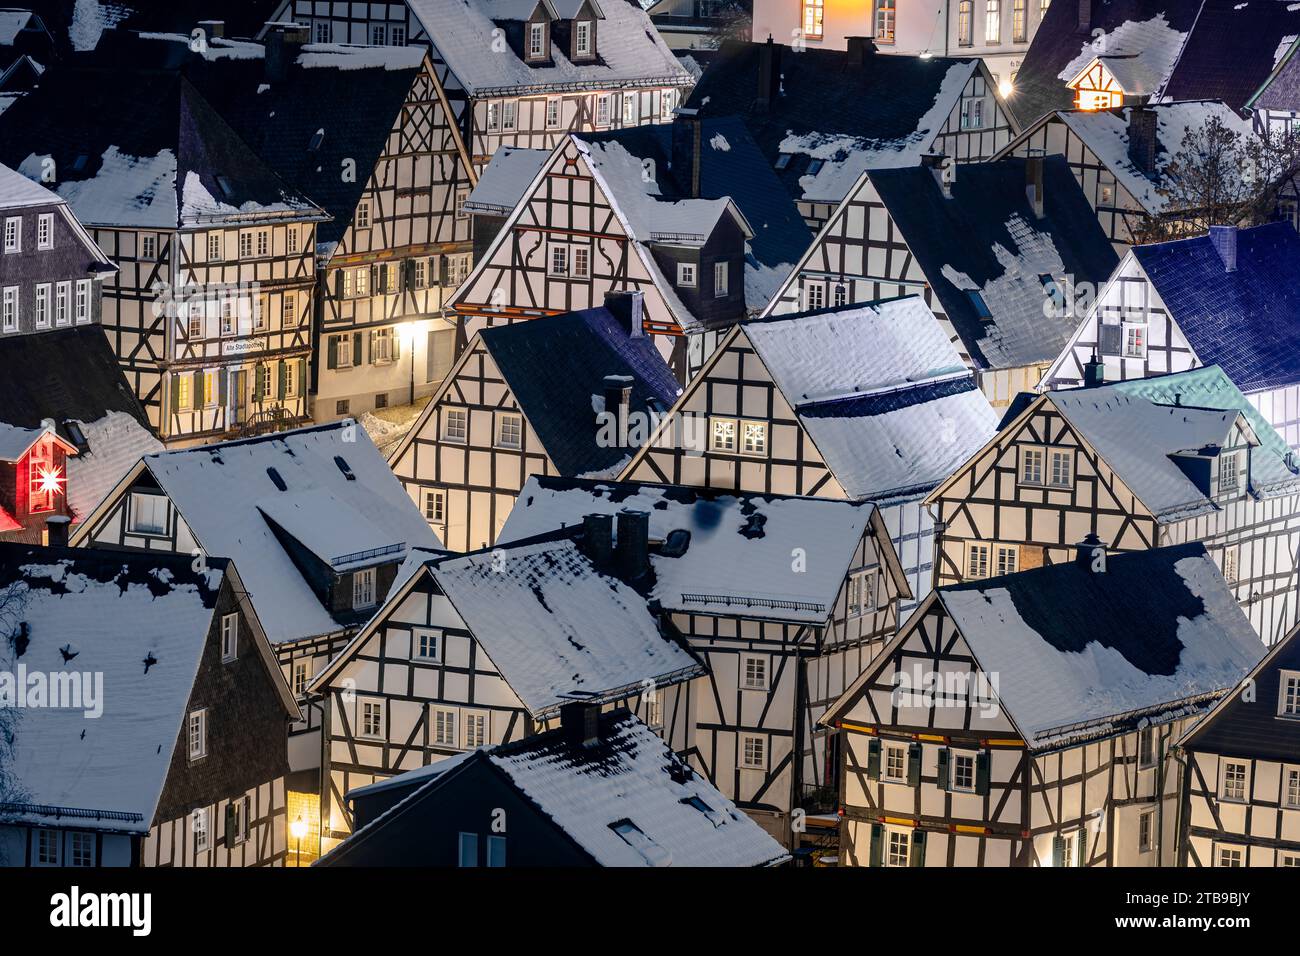 The historic center of Freudenberg in Germany Stock Photo